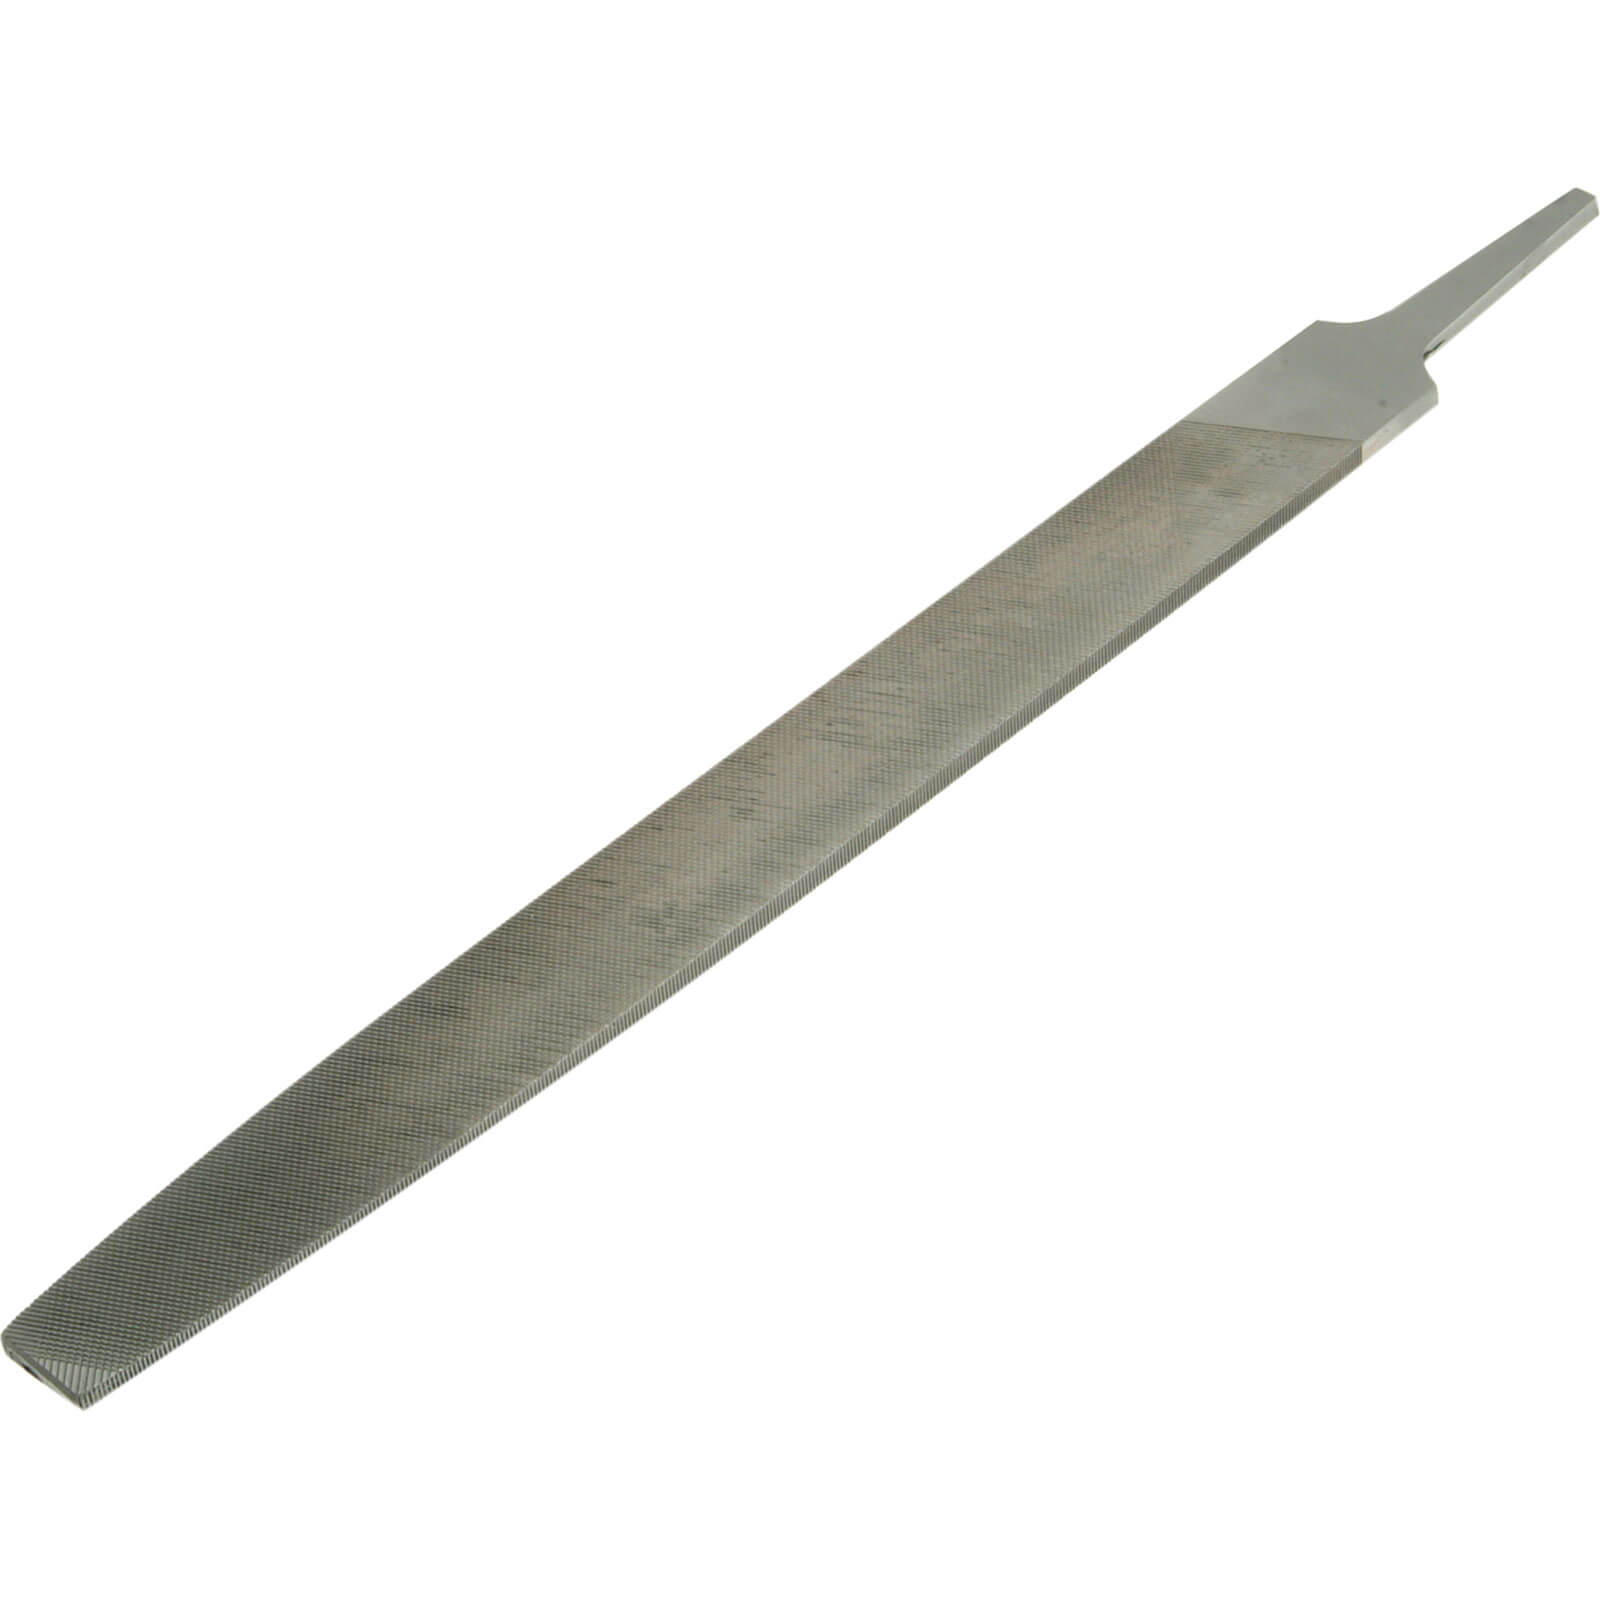 Bahco Flat Second Cut File 8"